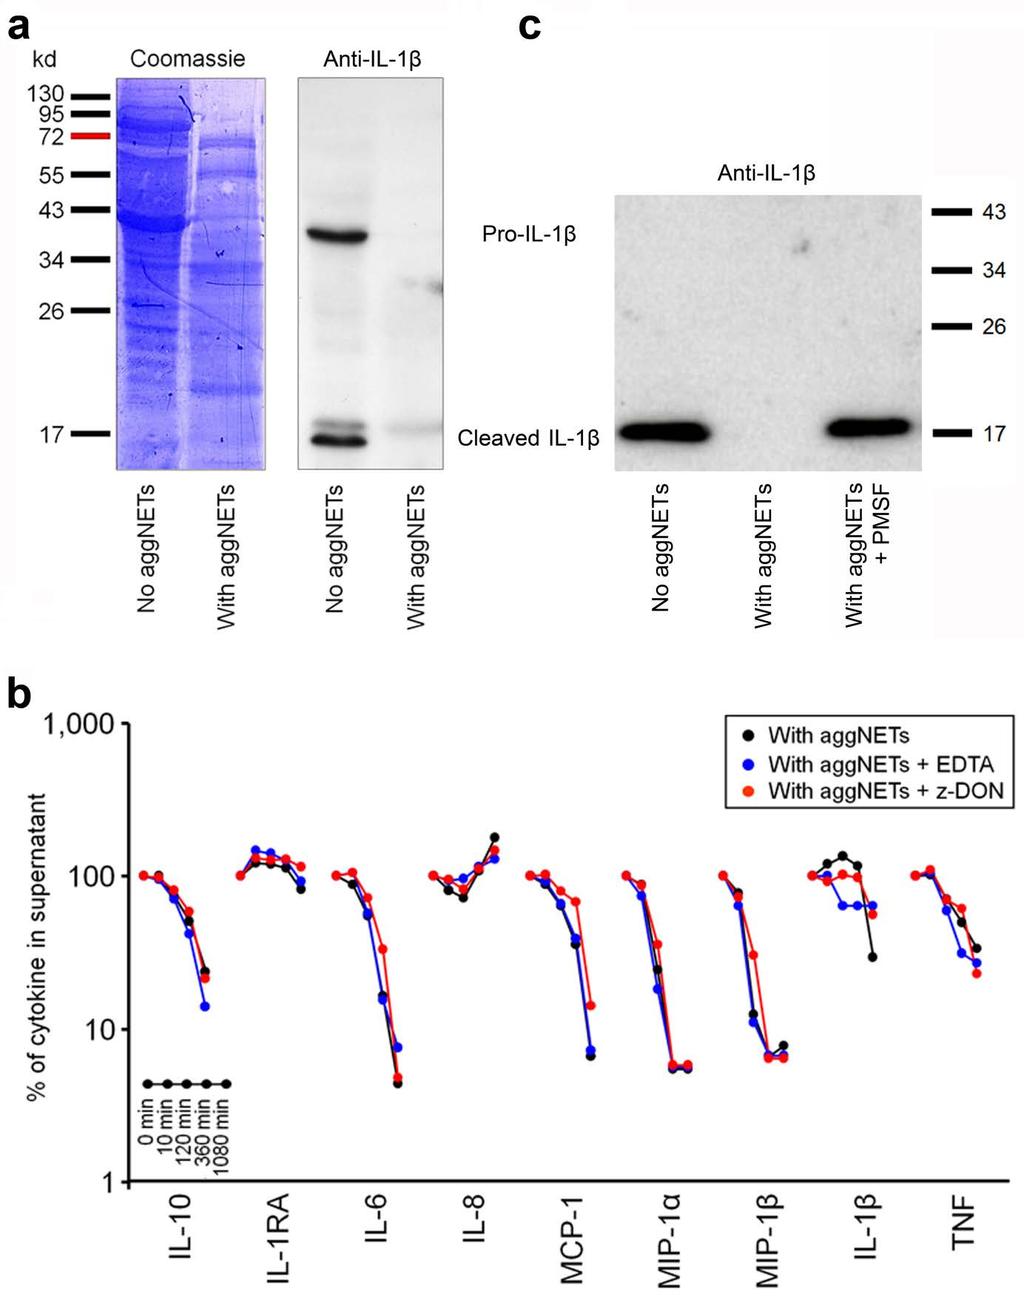 Supplementary Figure 9: Pro-IL-1β and IL-1β levels are decreased by serine proteases in aggregated NETs in a Ca 2+ - and transglutaminase-independent manner.